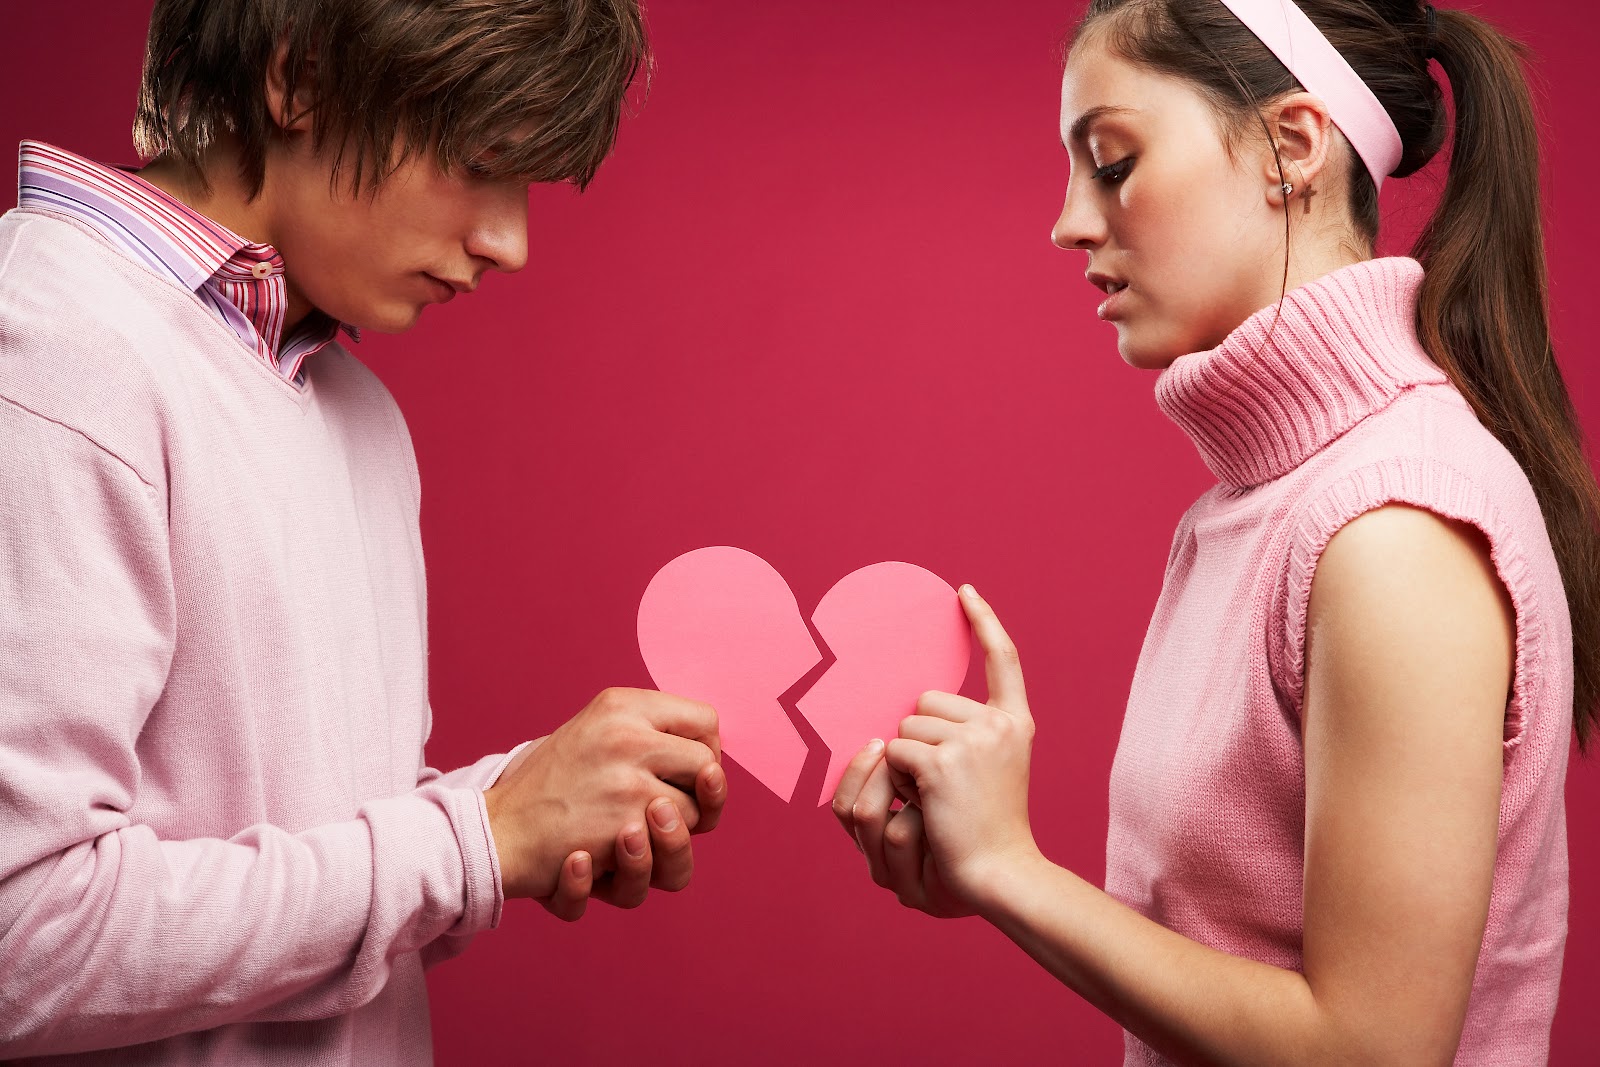 Golden Rules for a Peaceful Breakup